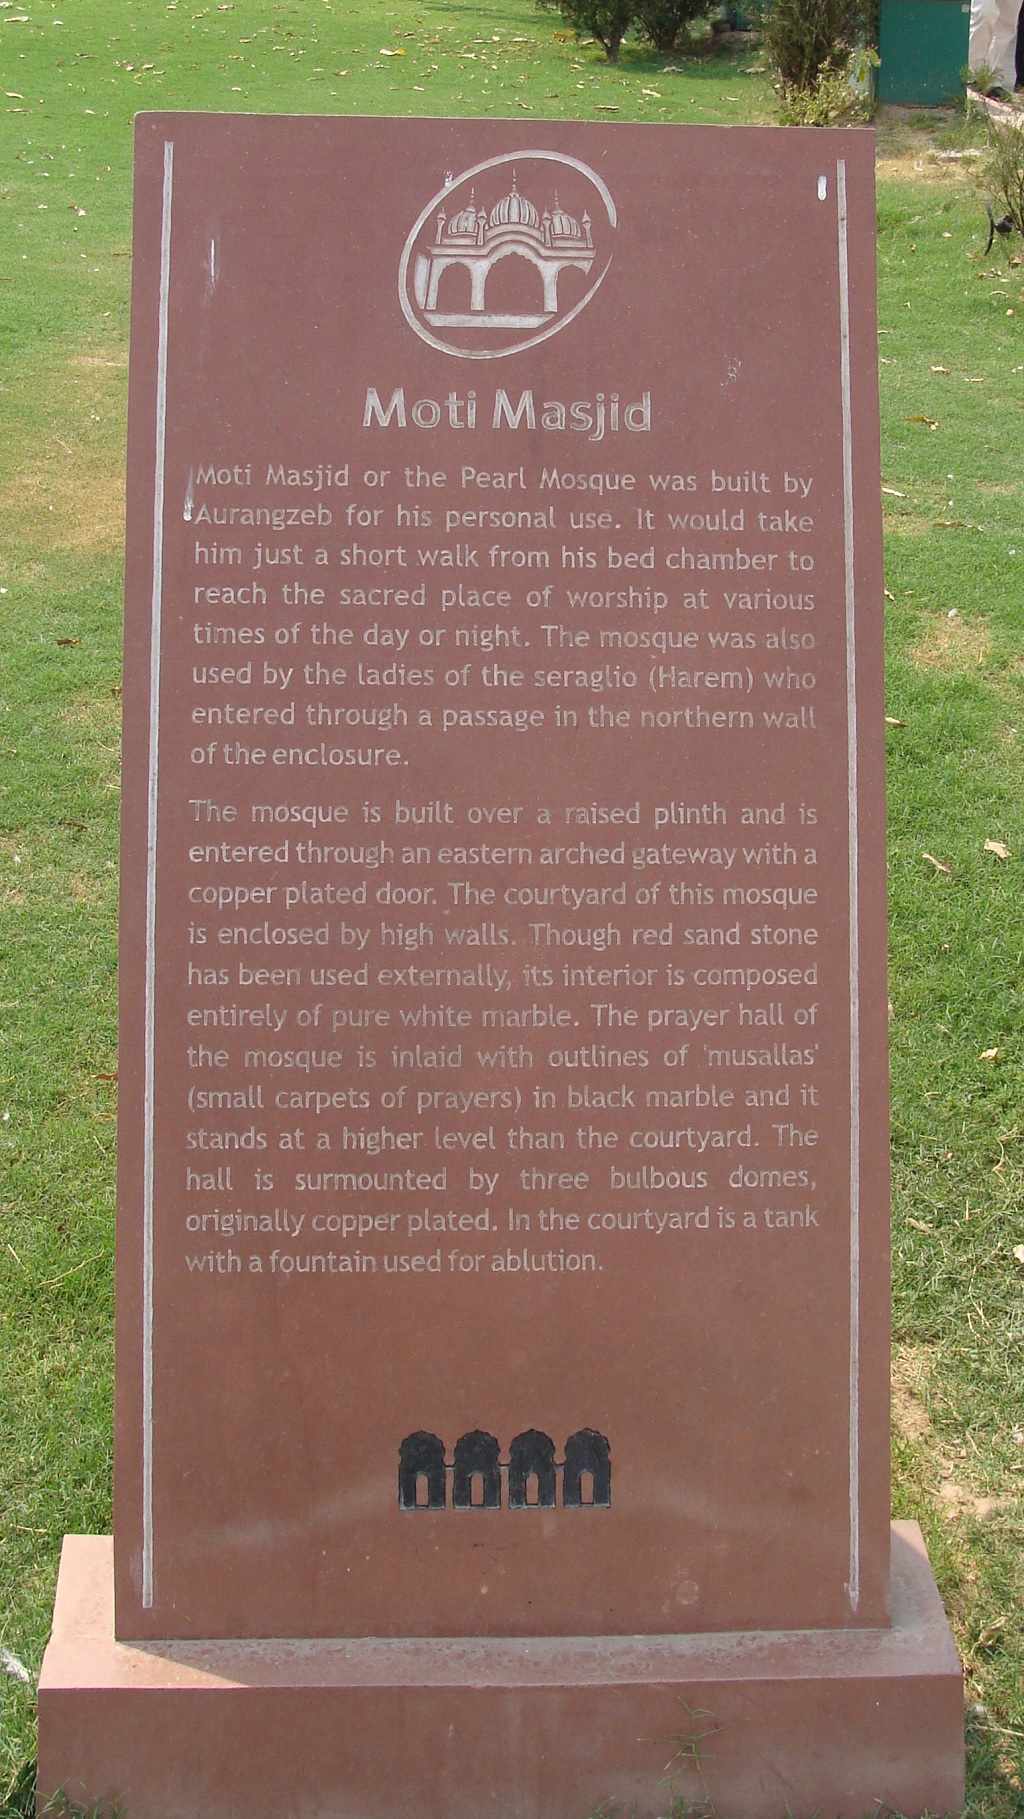 About: Moti Masjid or The Pearl Mosque